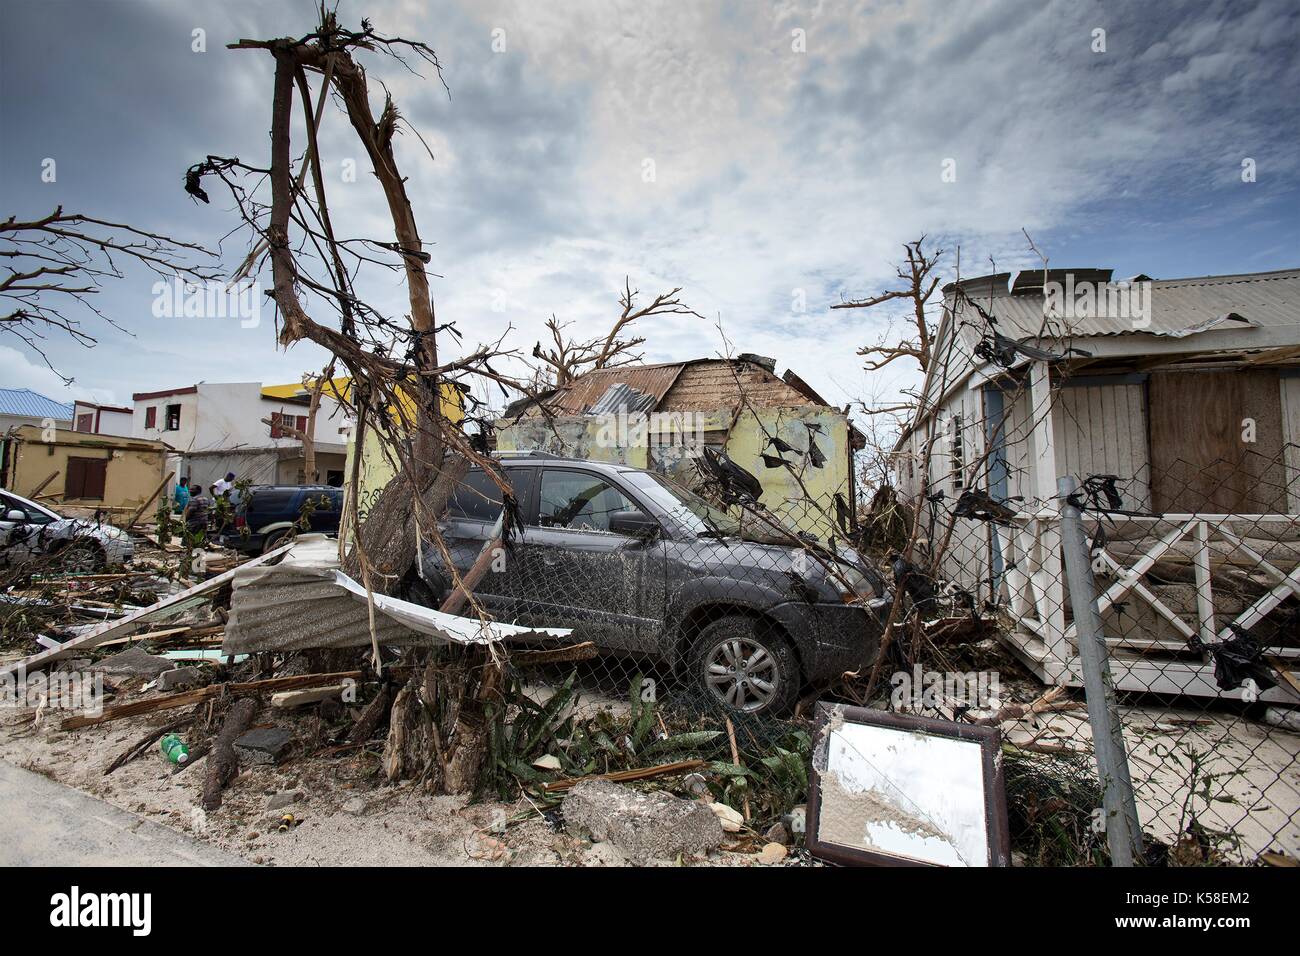 Vehicles and debris from destroyed homes litter the historic district on the Dutch island of St Maarten following a direct hit by Hurricane Irma, a Category 5 storm lashing the Caribbean September 7, 2017 in Philipsburg, St. Maarten. Stock Photo